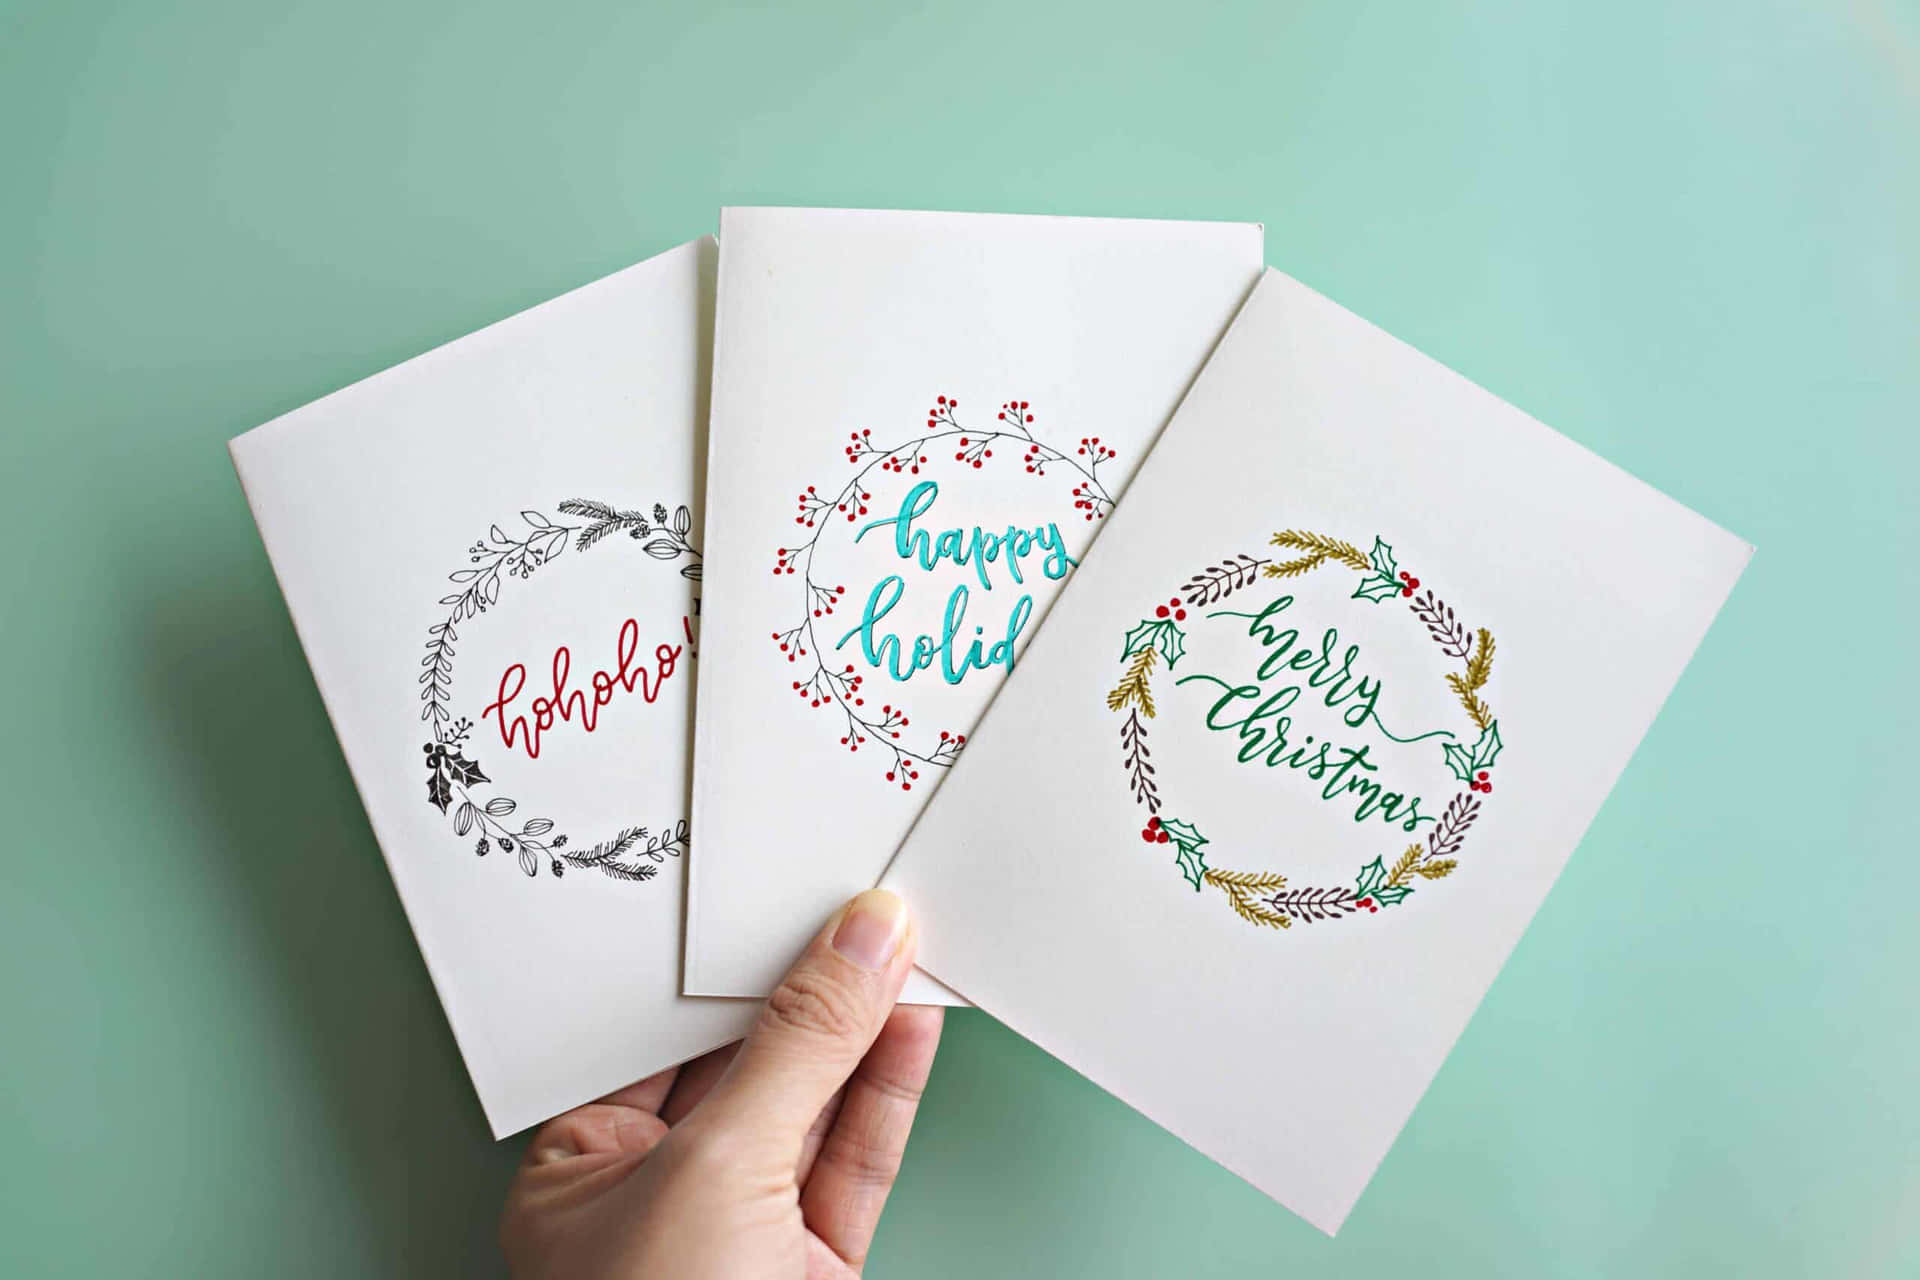 Spread some holiday cheer with a memorable Christmas card this season